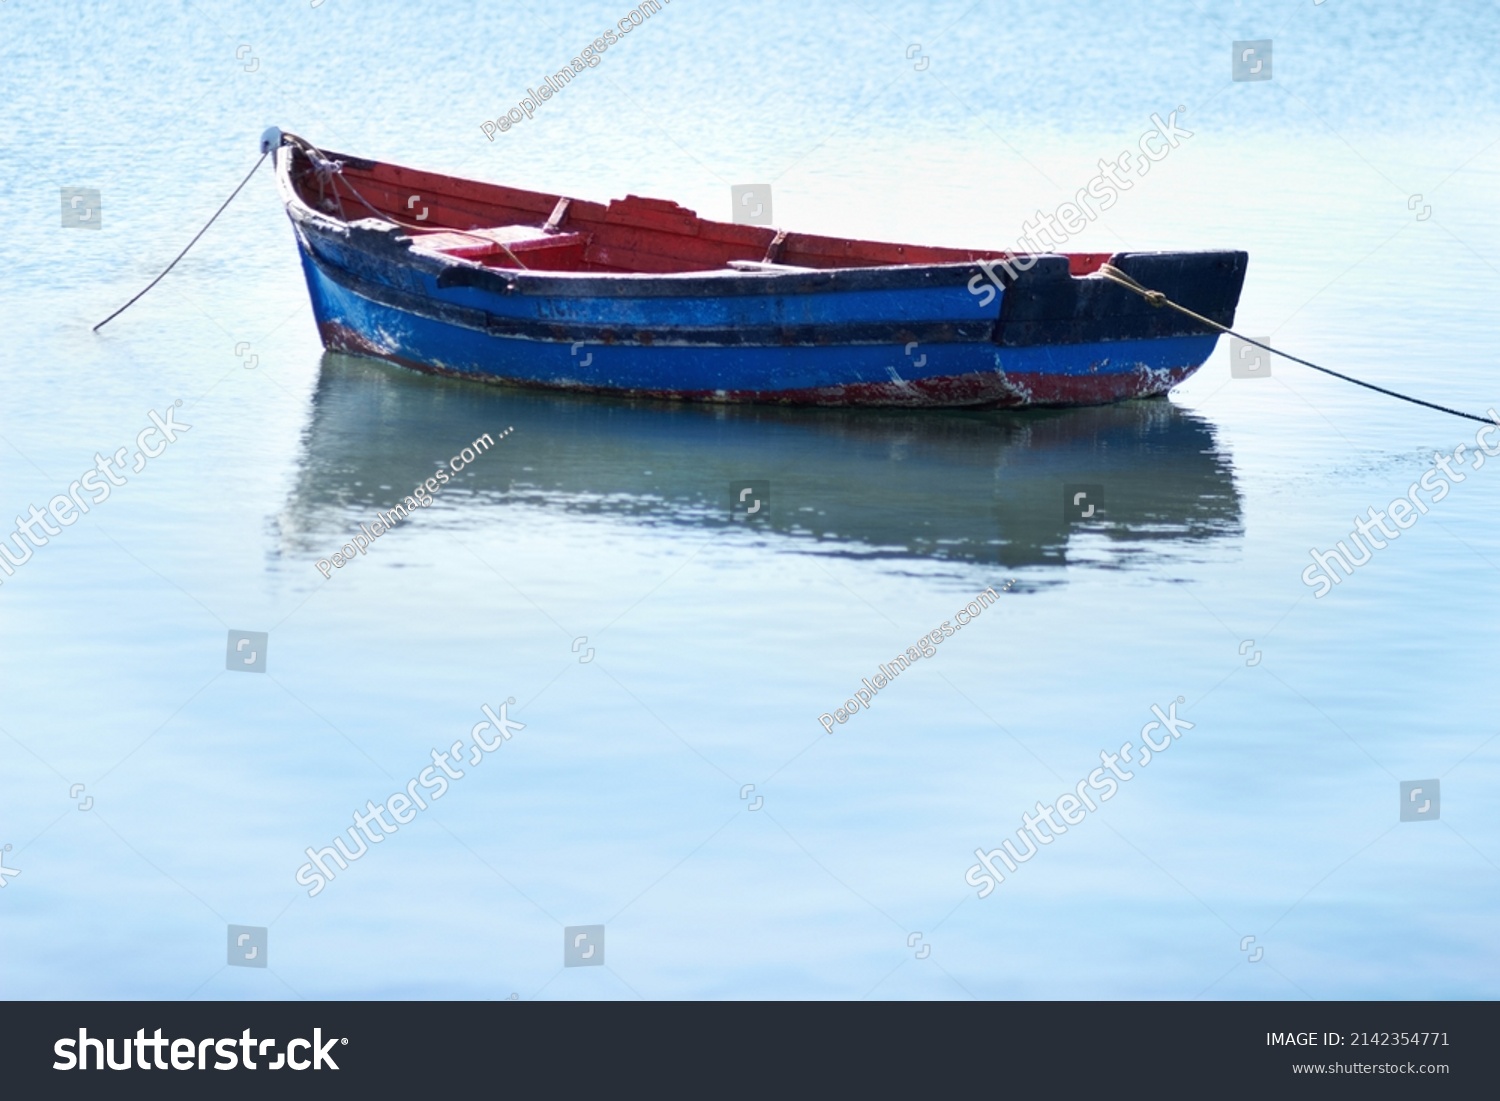 Not a breath of wind today. Shot of an empty fishing boat floating on calm waters. #2142354771